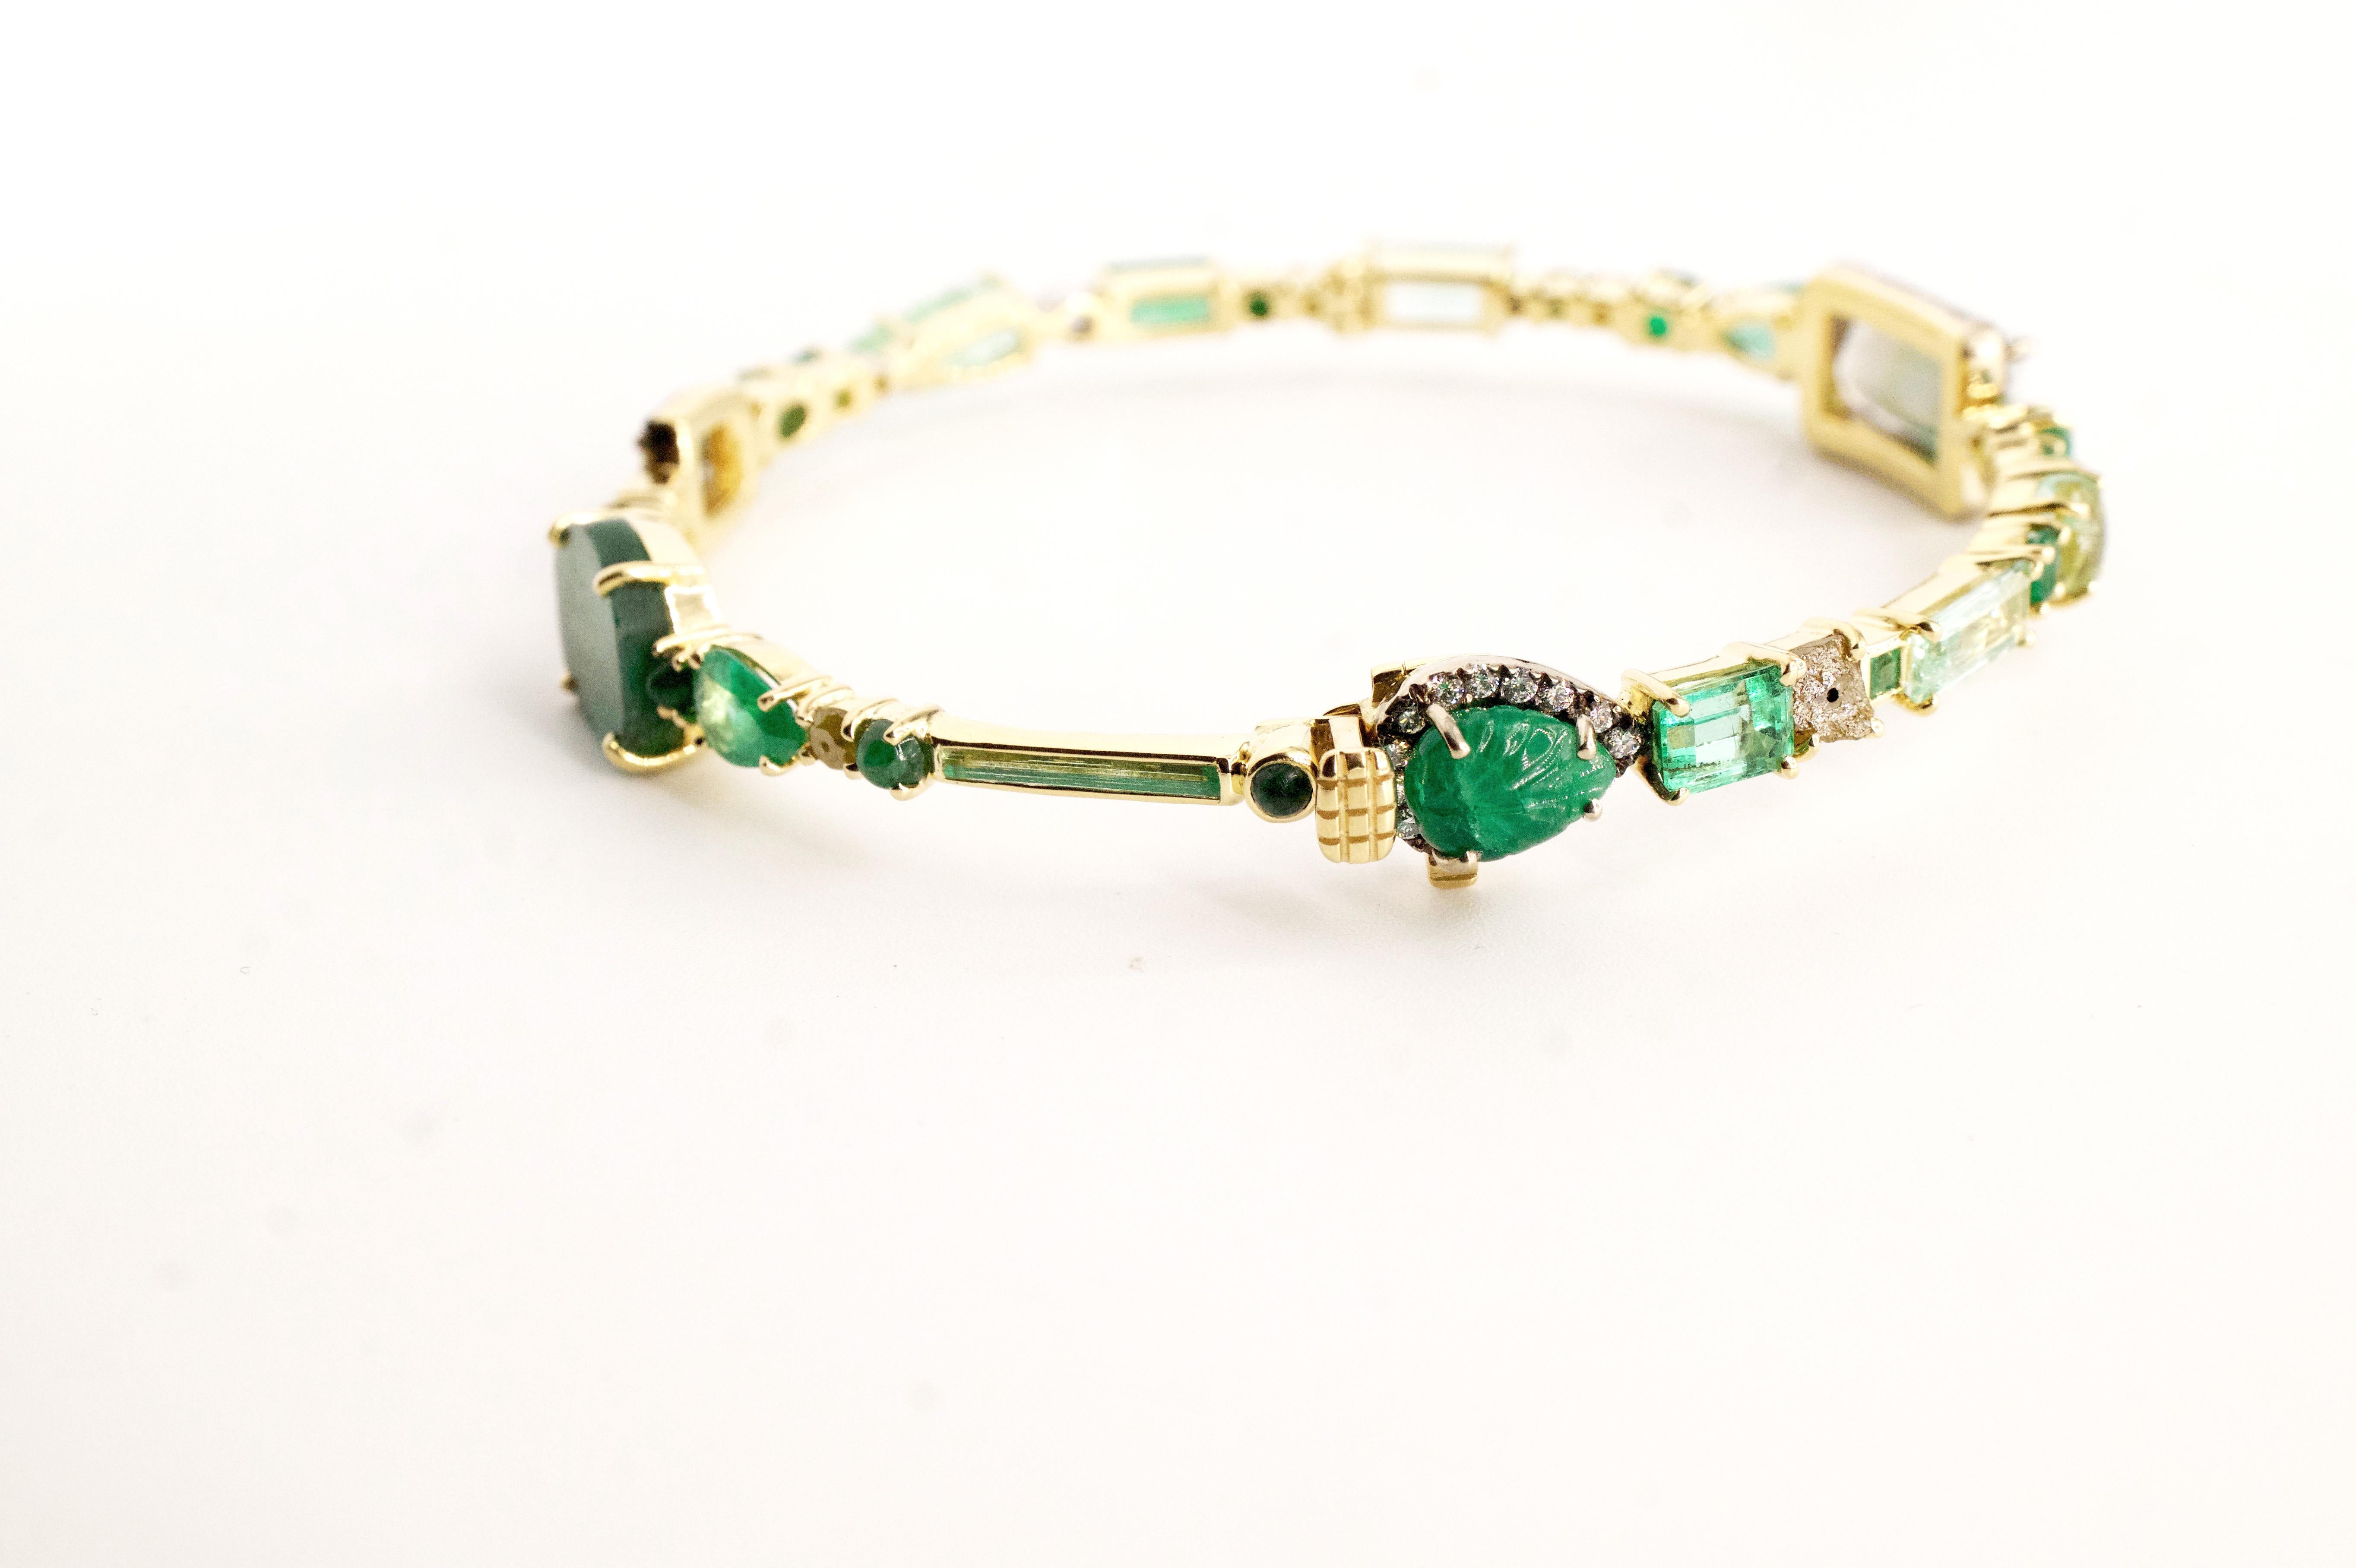 Emerald Baby Bangle 
An eighteen-karat yellow gold hinged bangle set entirely with white diamonds and emeralds in a variety of shapes and sizes
Diamond Total Weight – 1.49 cts.
Gemstone Total Weight – 18.63 cts.
This piece is one-of-a-kind and